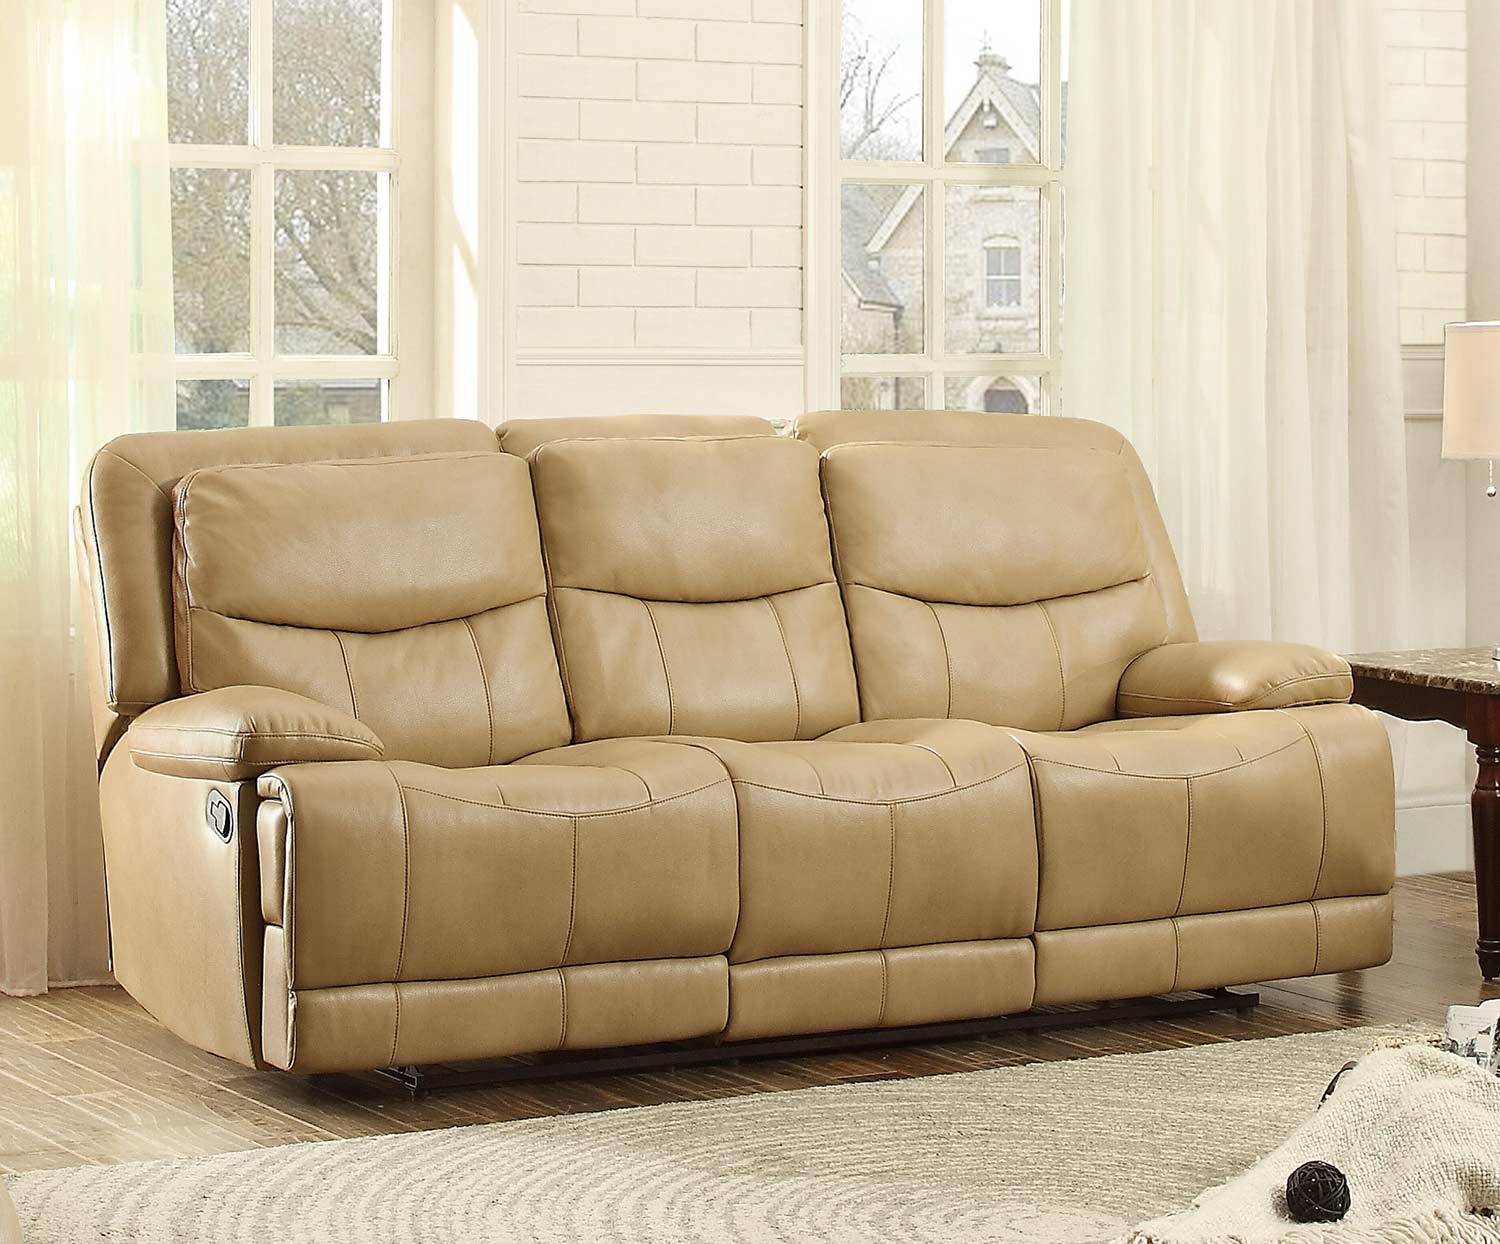 Homelegance Risco Double Reclining Sofa - Honey Taupe